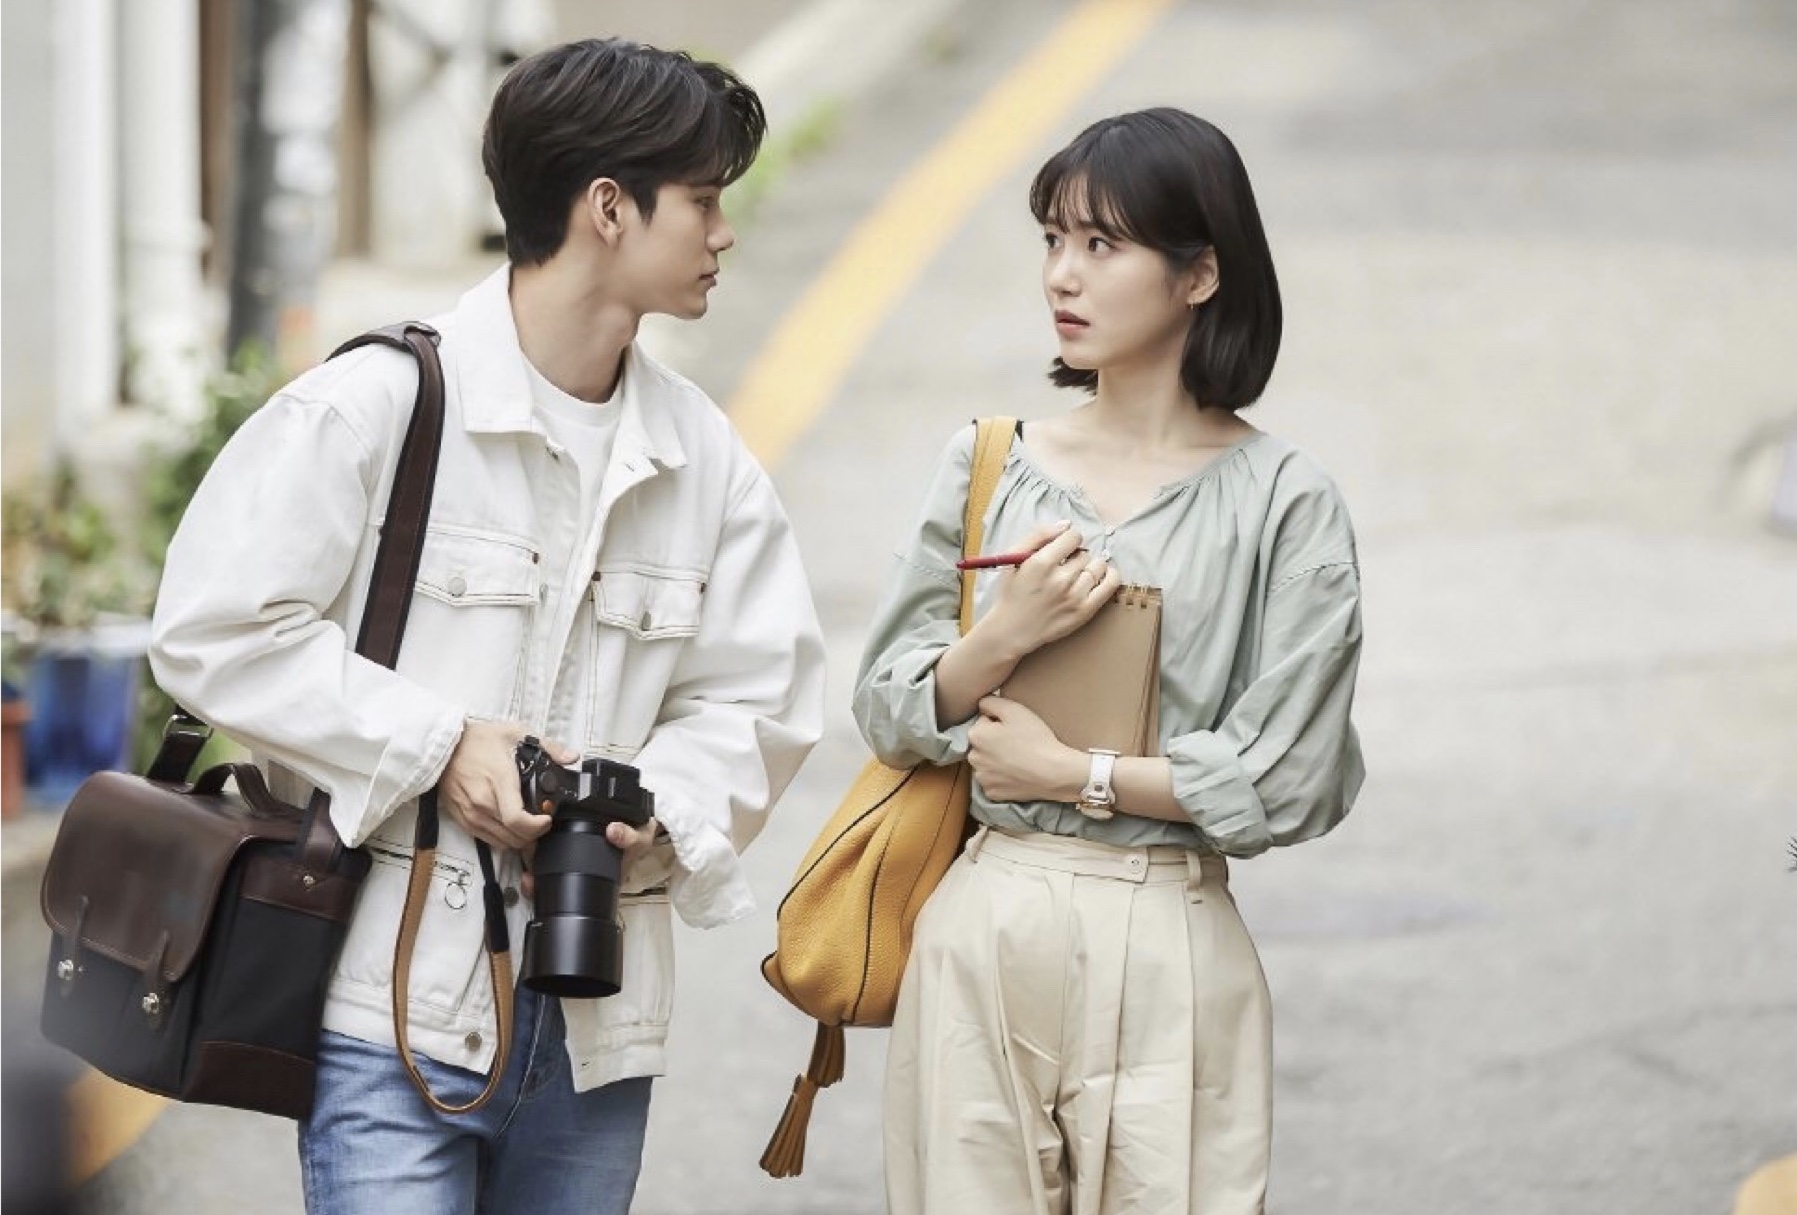 JTBC Upcoming Rom-Com release its first teaser image of Ong Seong Wu and Shin Ye Eun